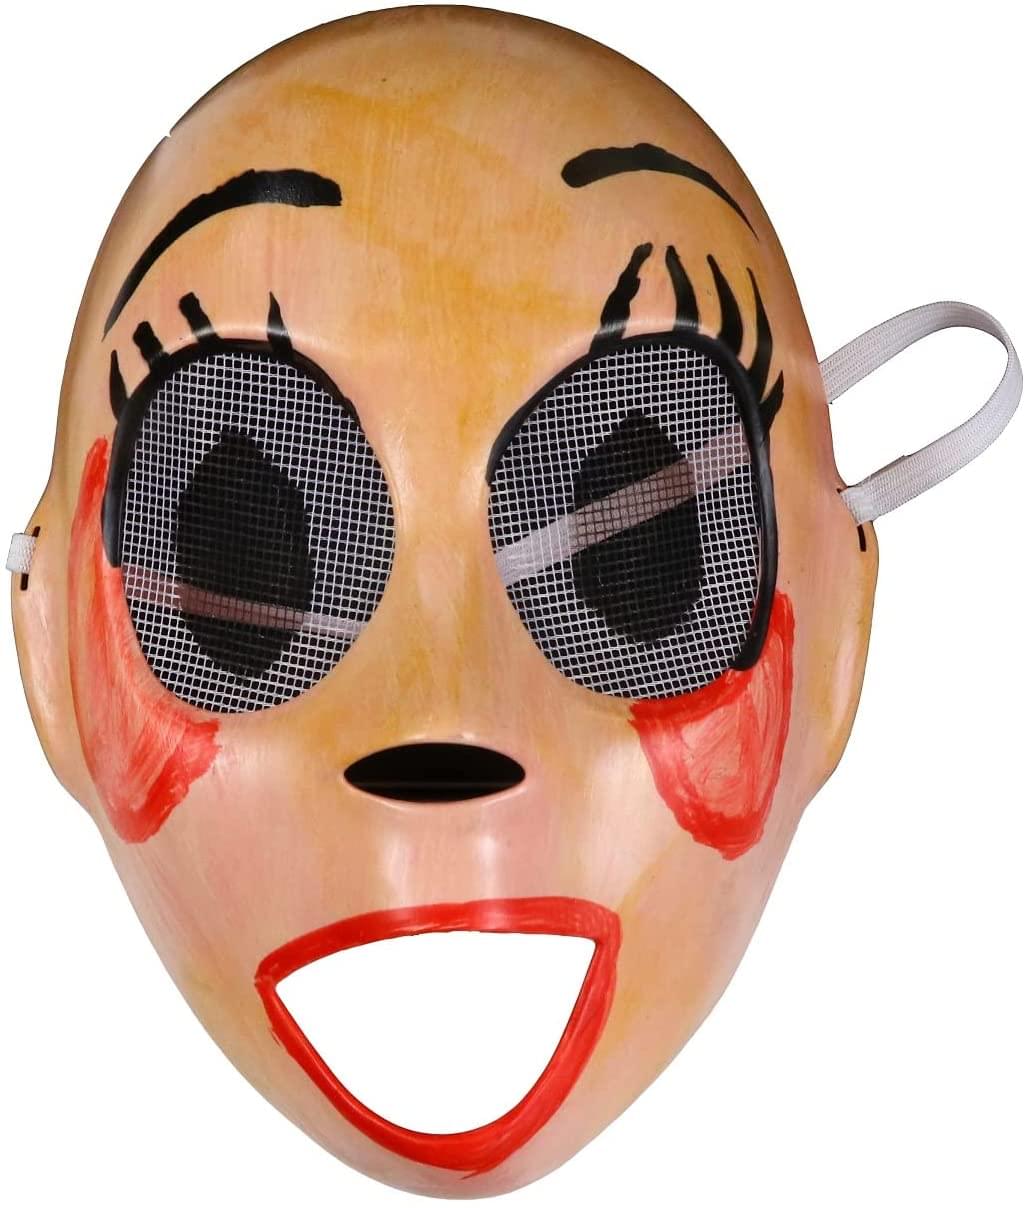 The Purge (TV Show) Doll Girl Mask